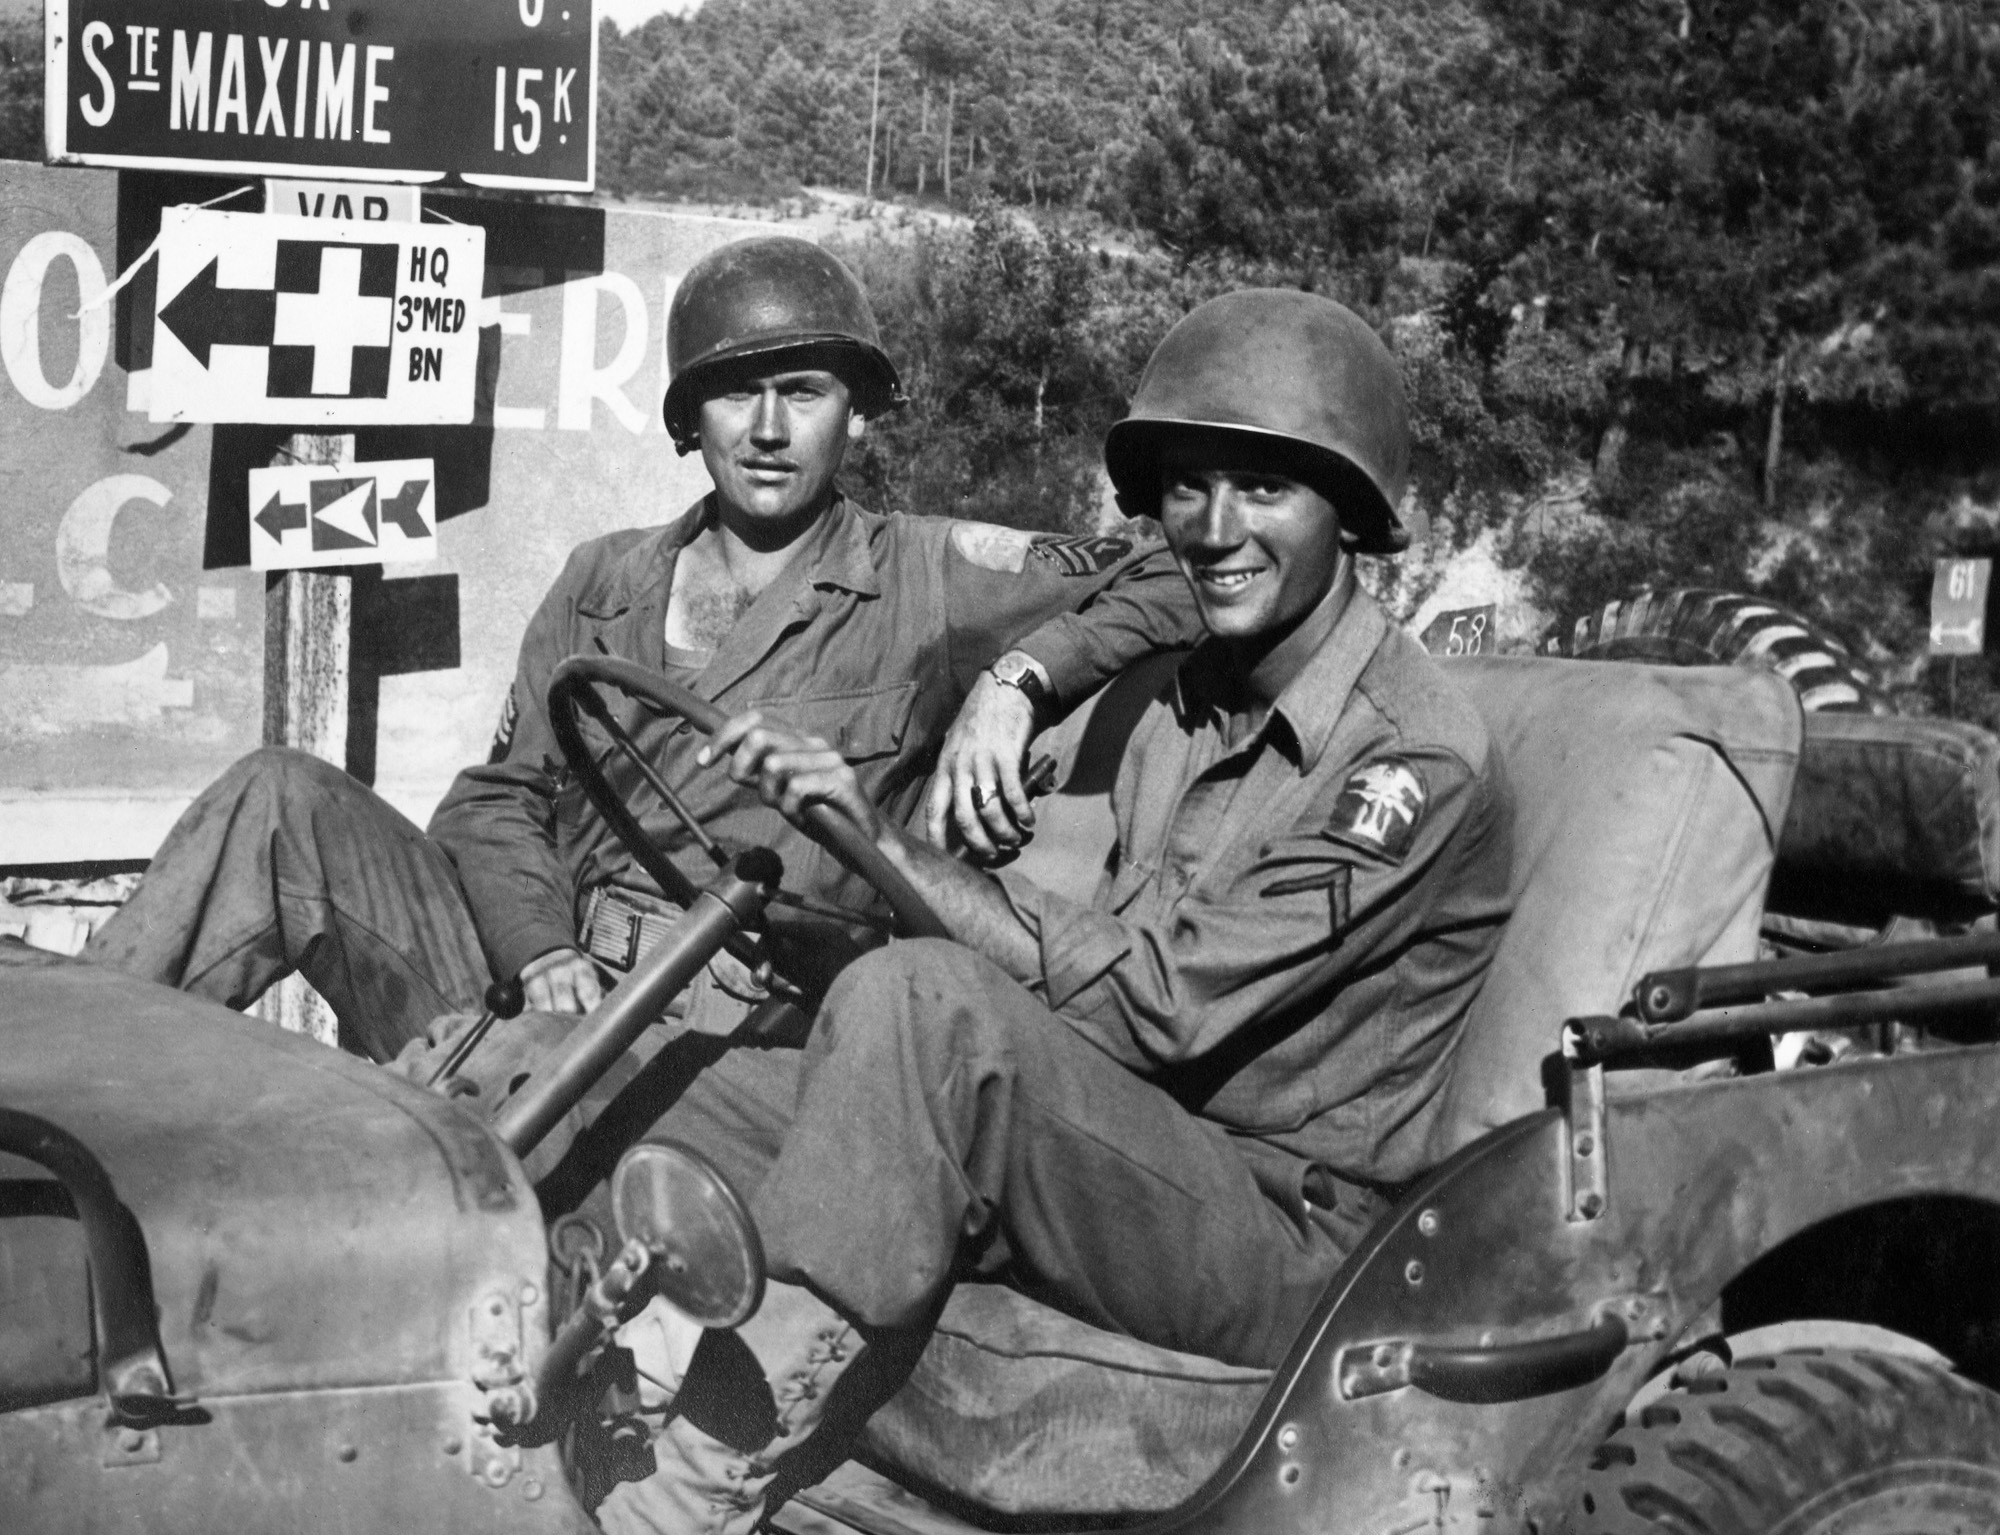 This photograph comes from my grandfather John "Jack" Baker's Warbook. It is of two unknown Army GIs in Southern France. Based on the large road sign, we can assume that the location of this photo is 15 kilometers from Sainte Maxime. In the right hand side of the photo, you can also see a sign with the numbers 61 on it. This is likely D61 which would mean the picture was likely taken around Port Grimaud. Although not signed, this photo was probably taken by Dale Rooks sometime in the last two weeks of August, 1944. View full size.